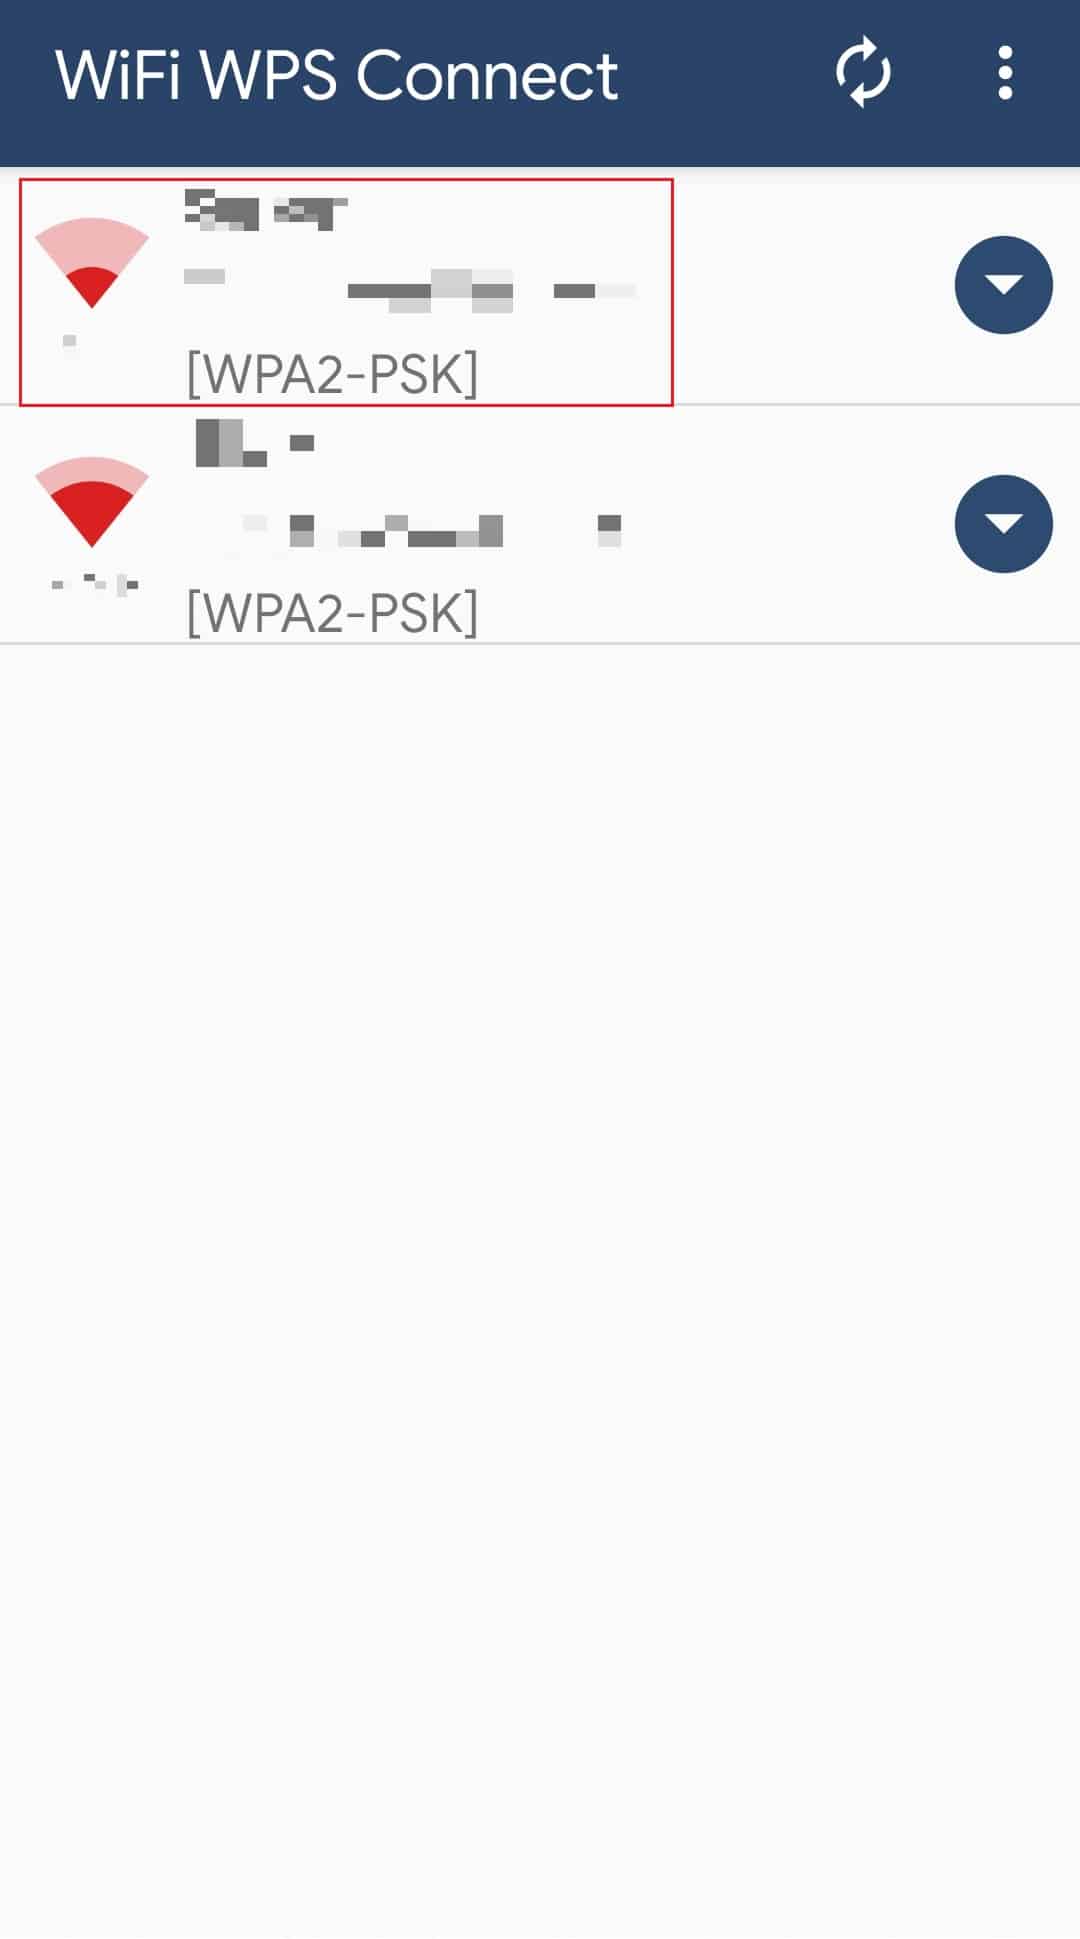 select a network in WiFi WPS Connect android app